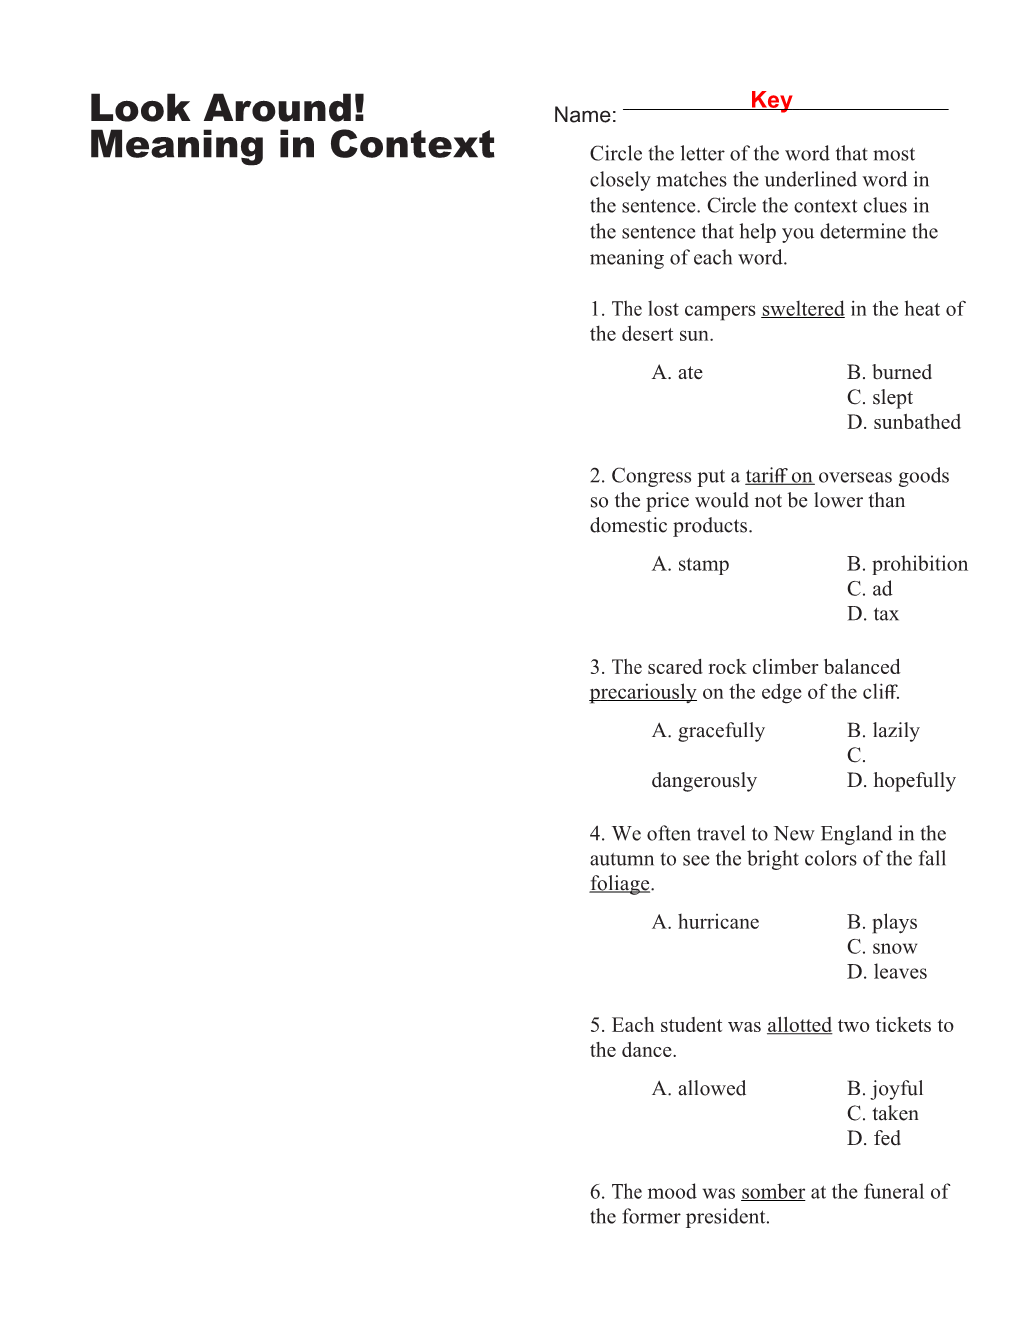 Look Around! Meaning in Context Middle School Worksheets